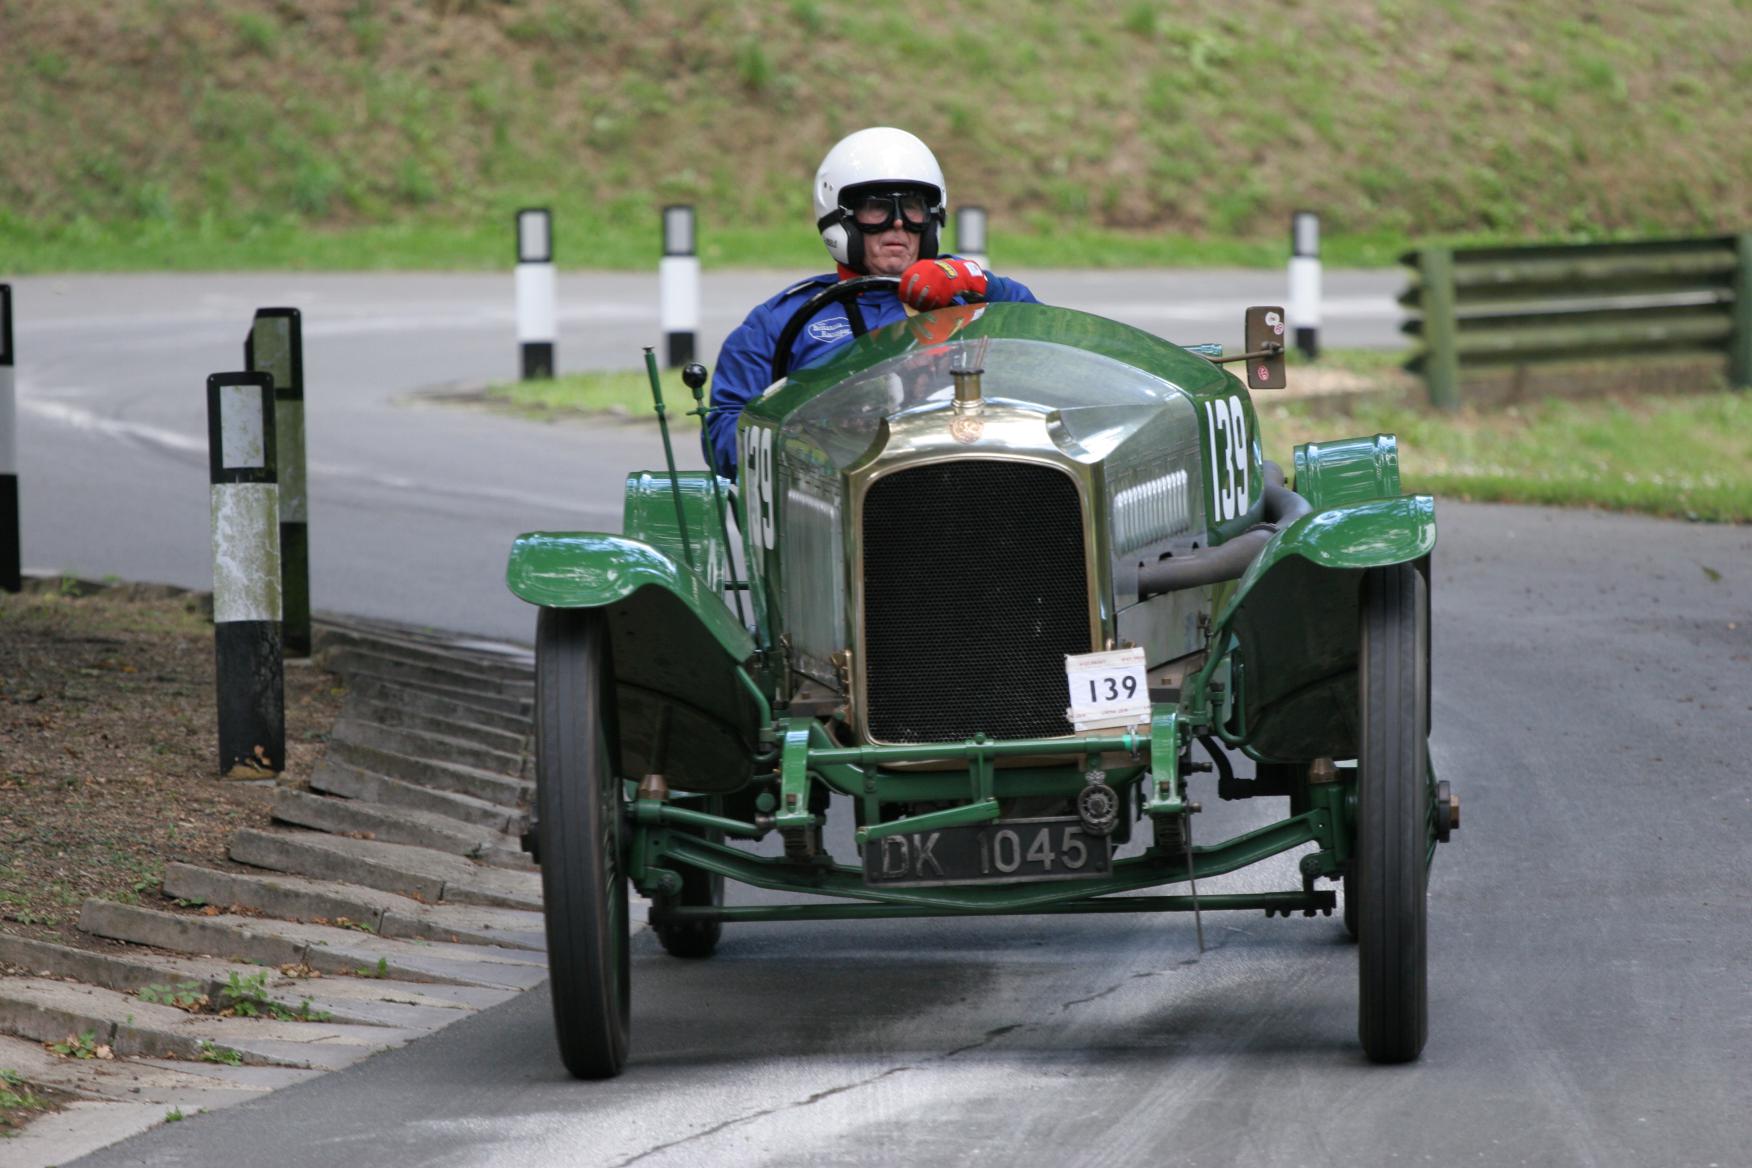 Birthday Vauxhall 30-98 up against 17 Edwardians at Prescott Speed Hill Climb  cover